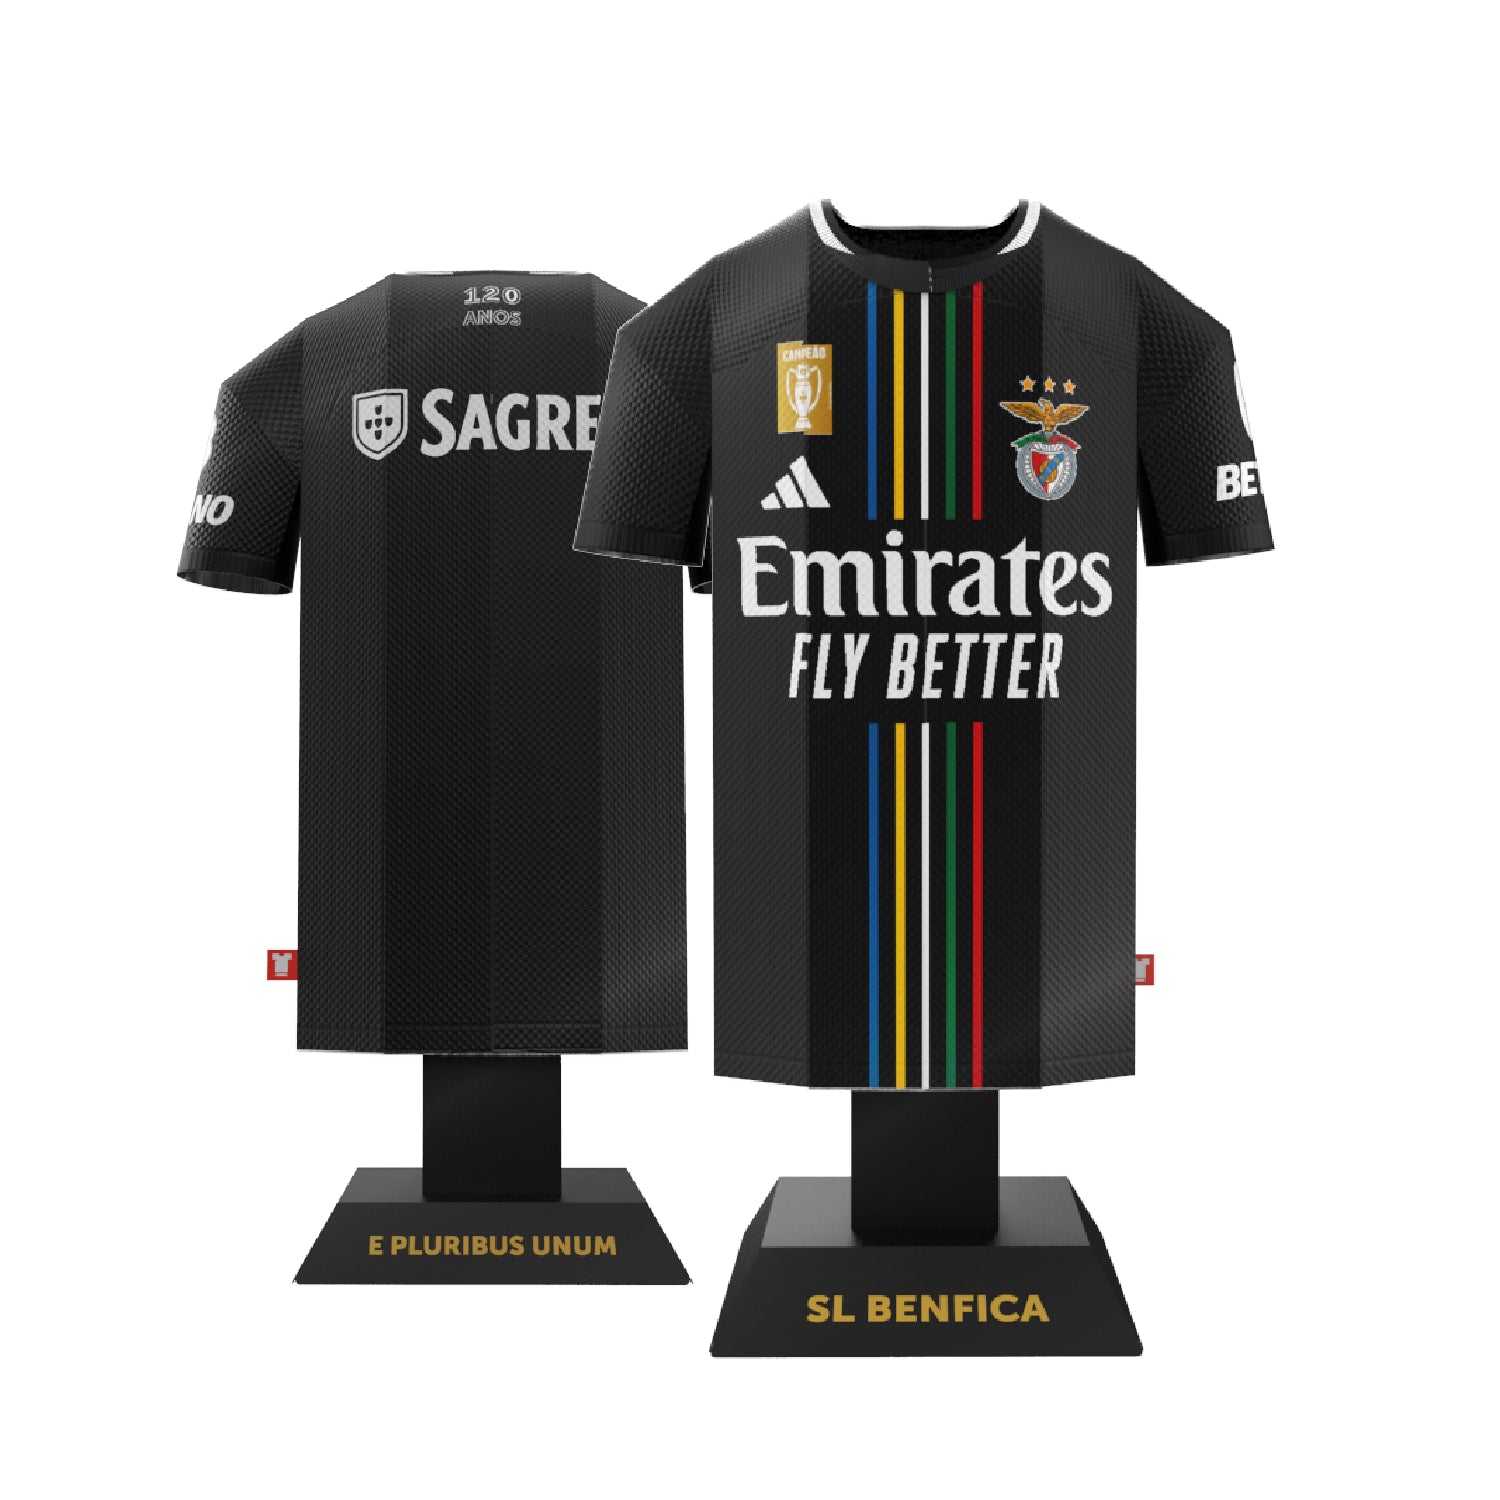 Benfica away kit front and back